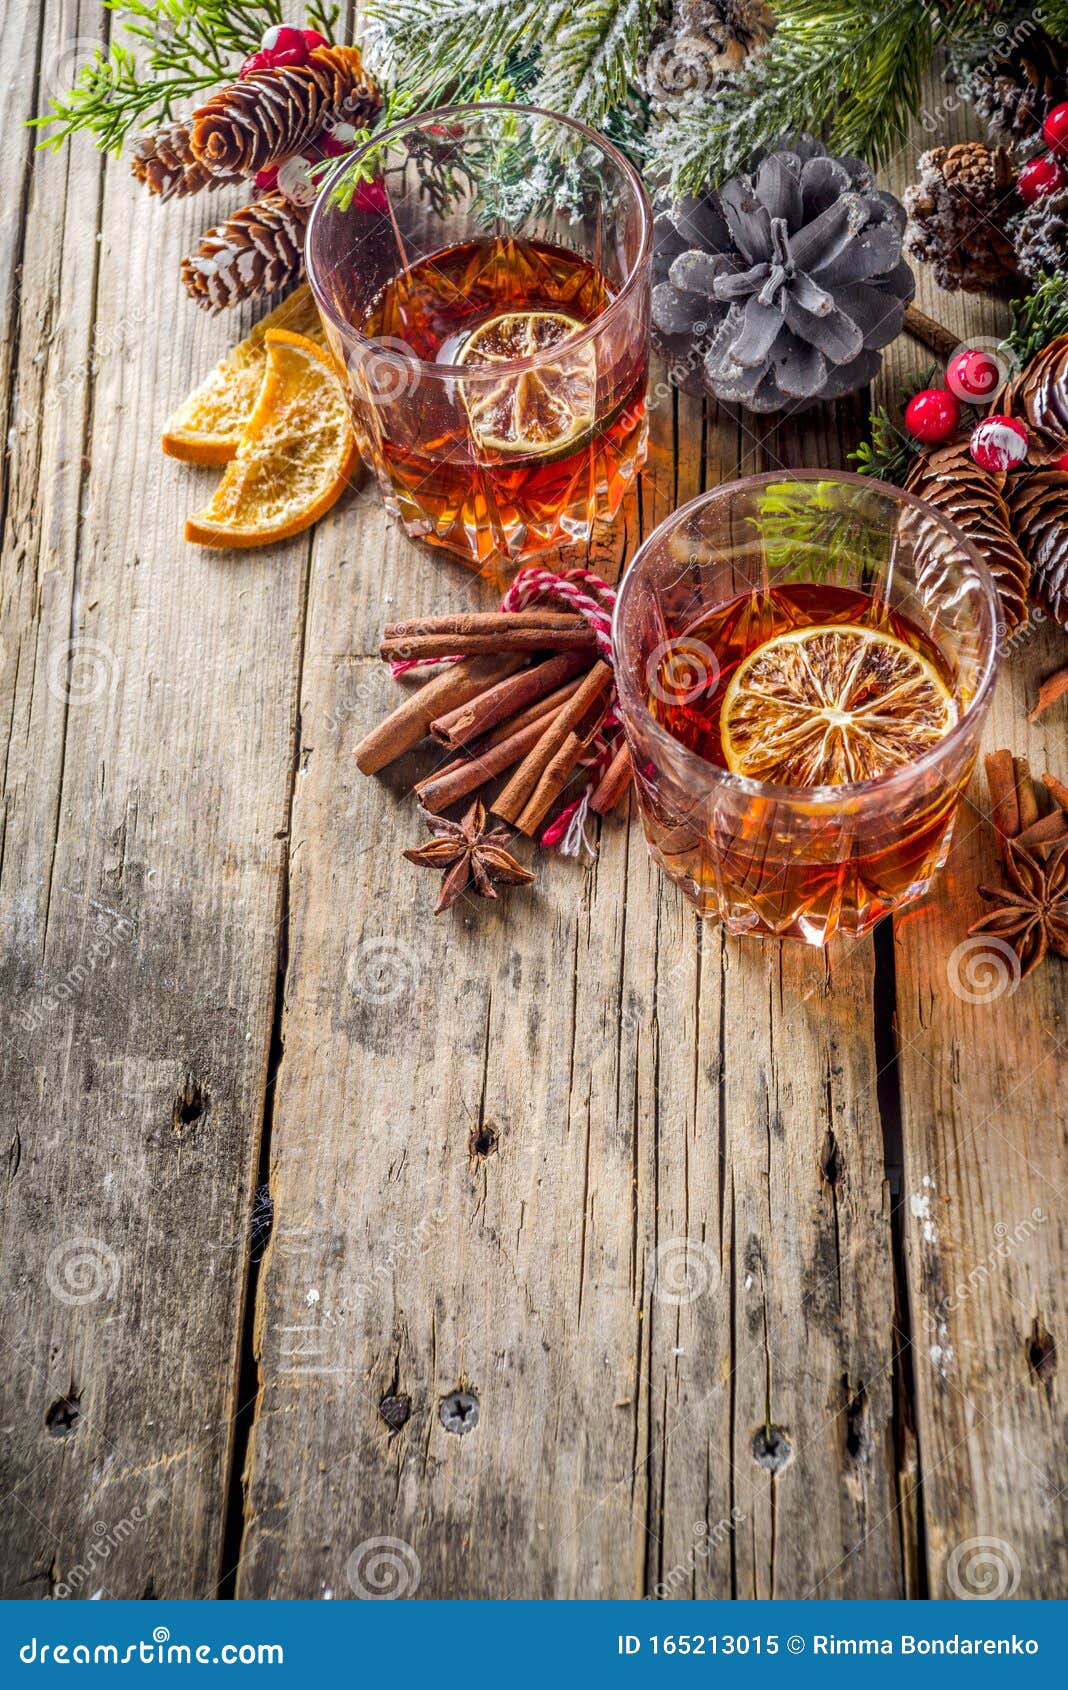 Orange Spice And Bourbon Whiskey Cocktail Stock Image Image Of Drunk Amber 165213015